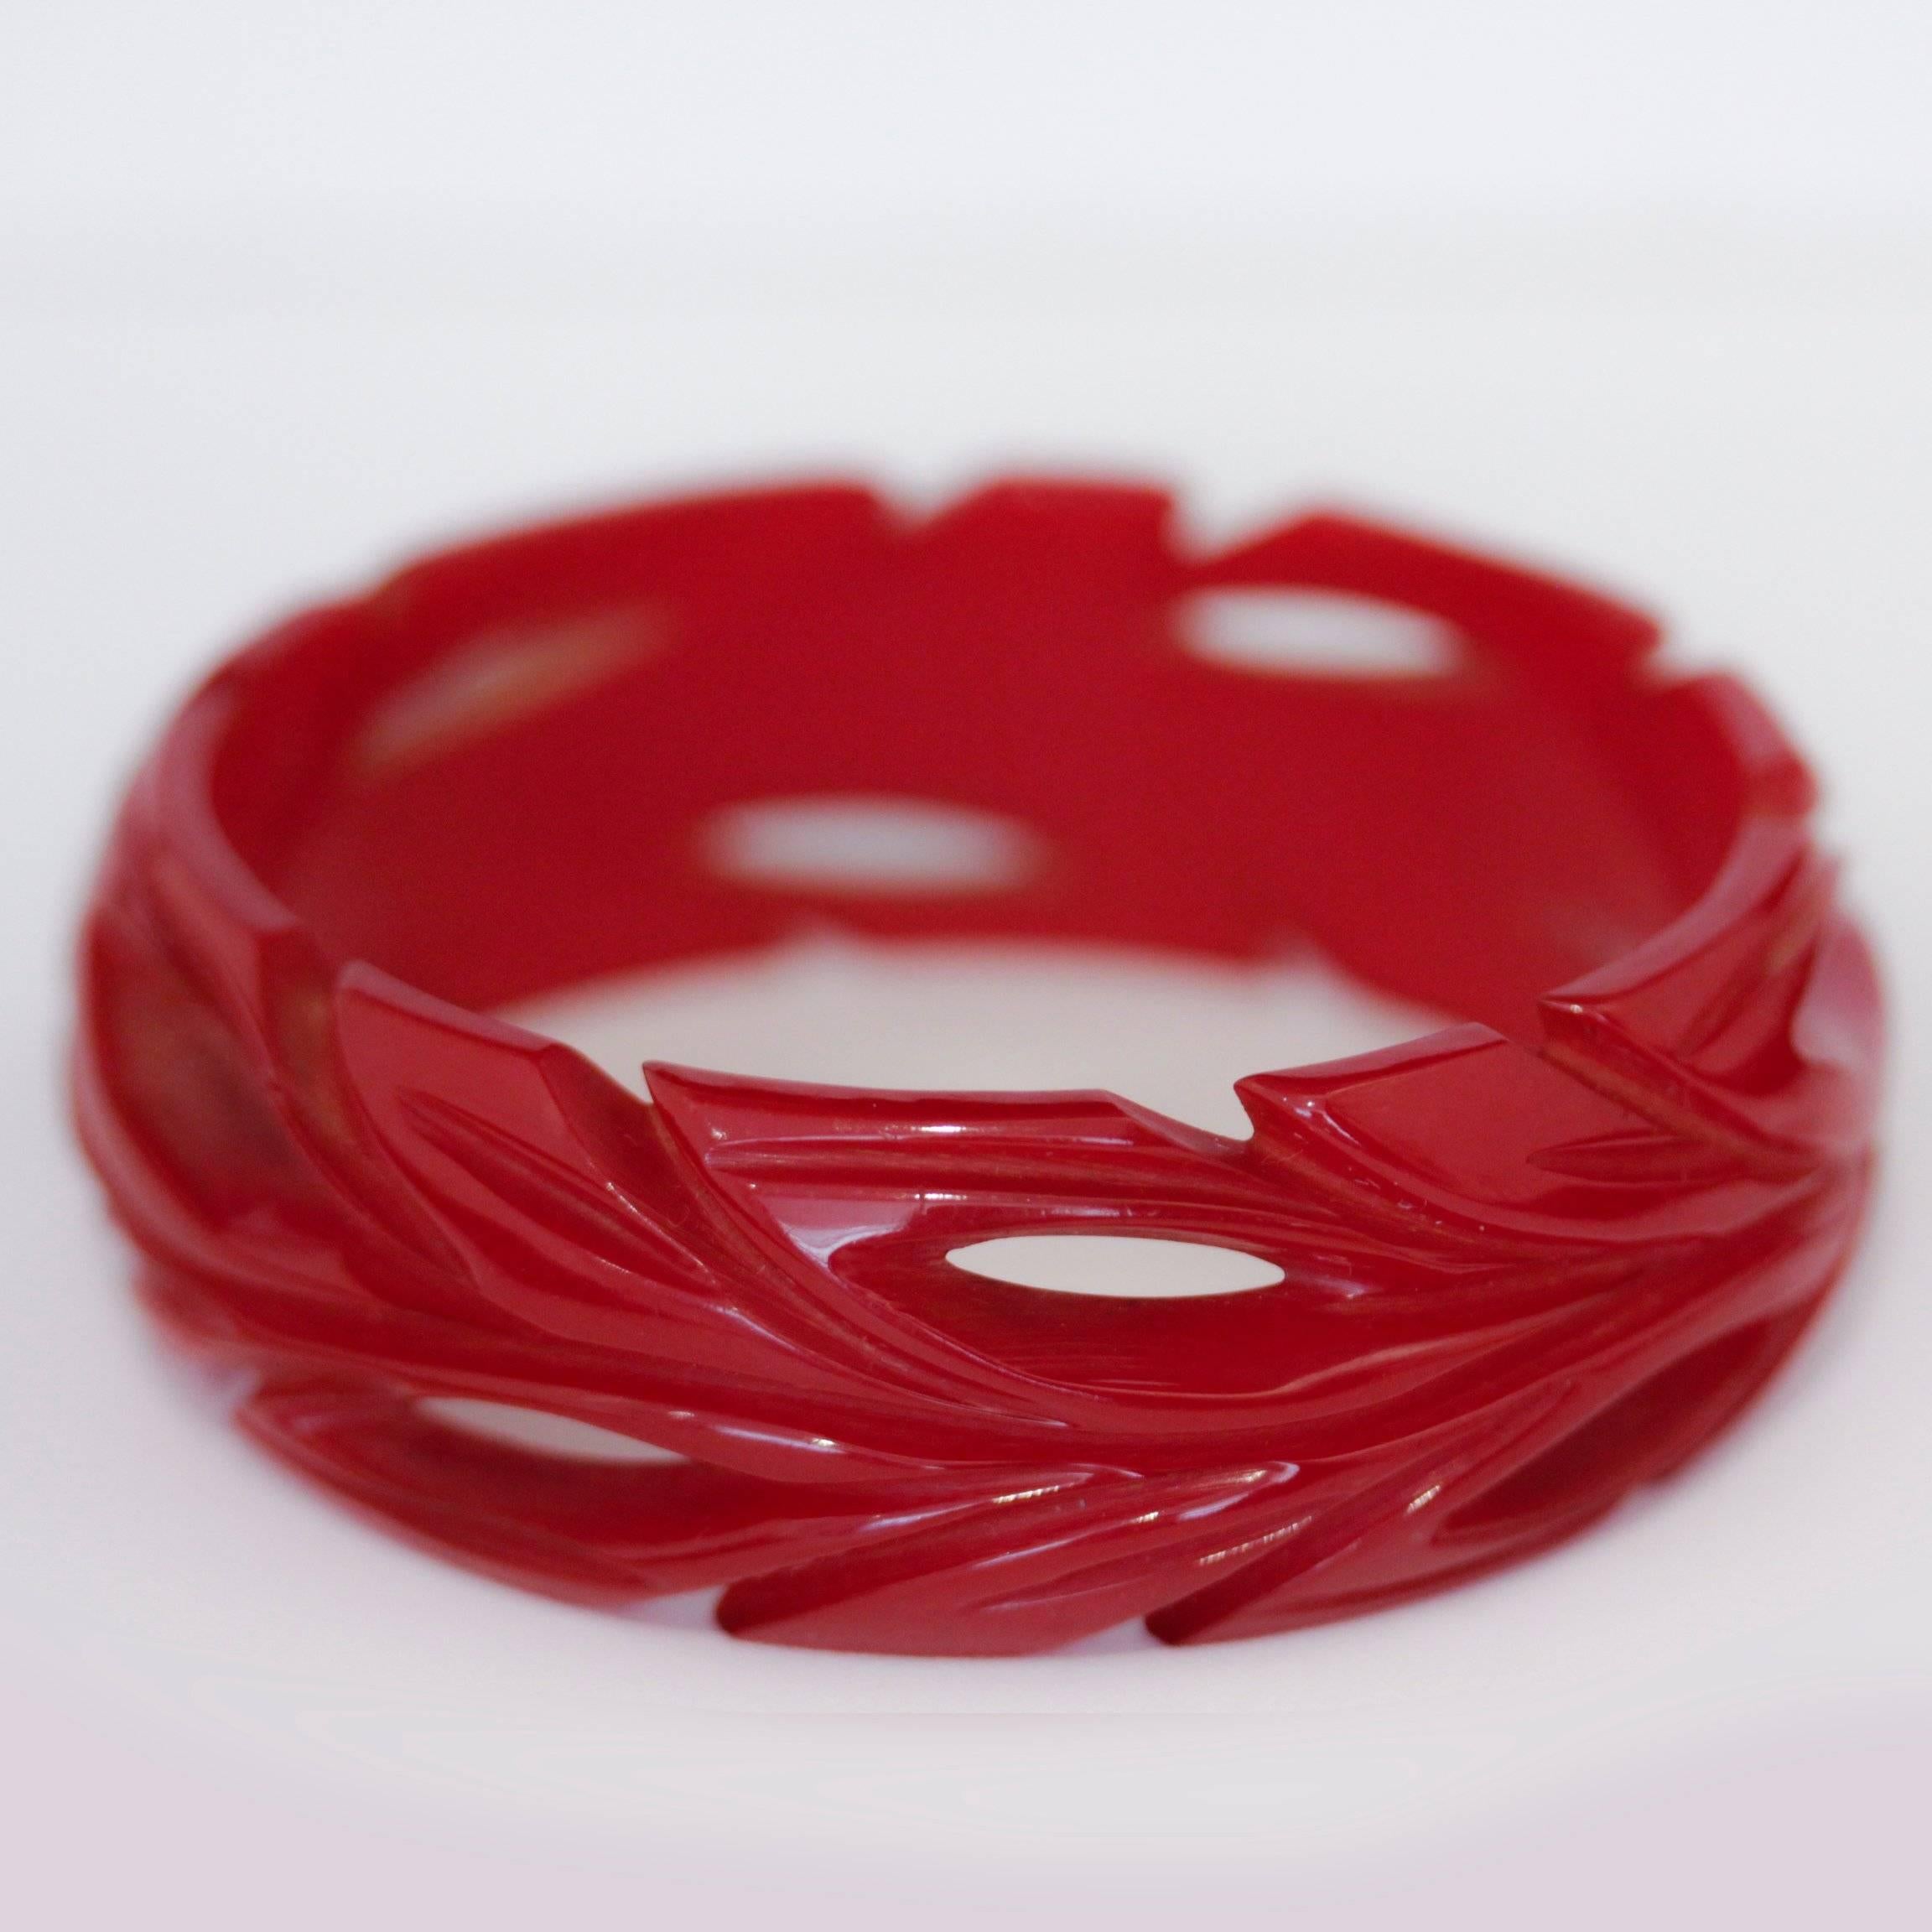 Art Deco cherry red bakelite bangle with deep leaf carvings and cut outs. Beautiful, easy to wear, and like all Vintage Times Bakelite, guaranteed to be genuine.

Dimensions - Width 2 cm
Internal diameter - 6 cm